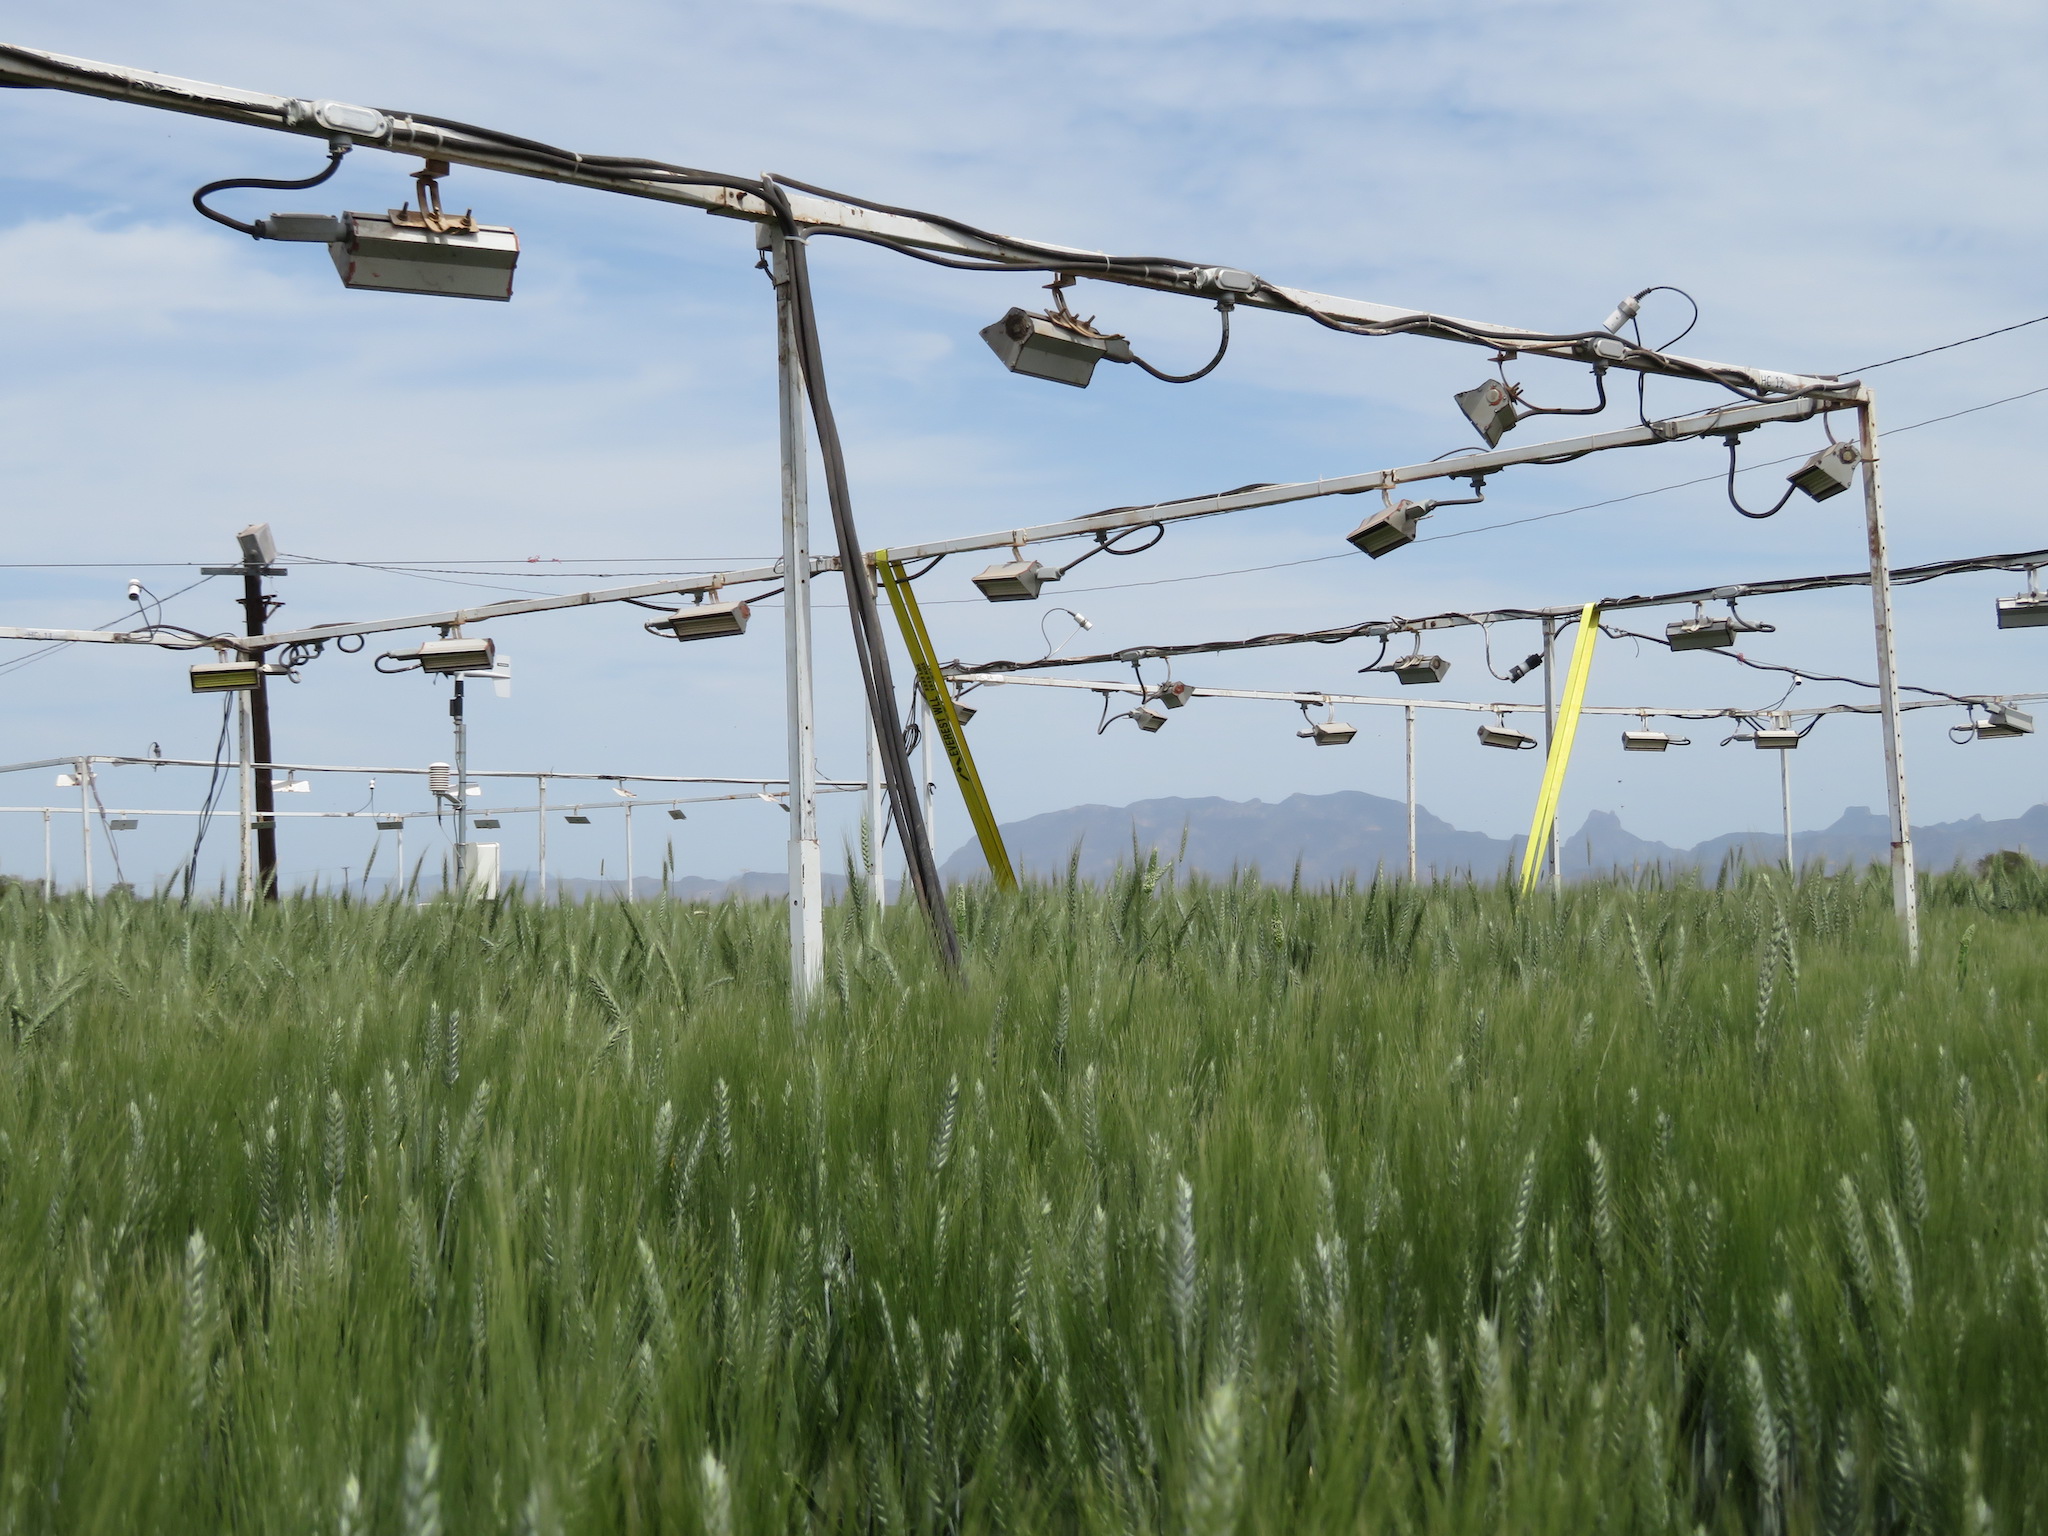 CIMMYT researchers use coverings to increase night-time temperatures and study wheat’s heat tolerance mechanisms, key to overcoming climate change challenges to wheat production. (Photo: Kevin Pixley/CIMMYT)